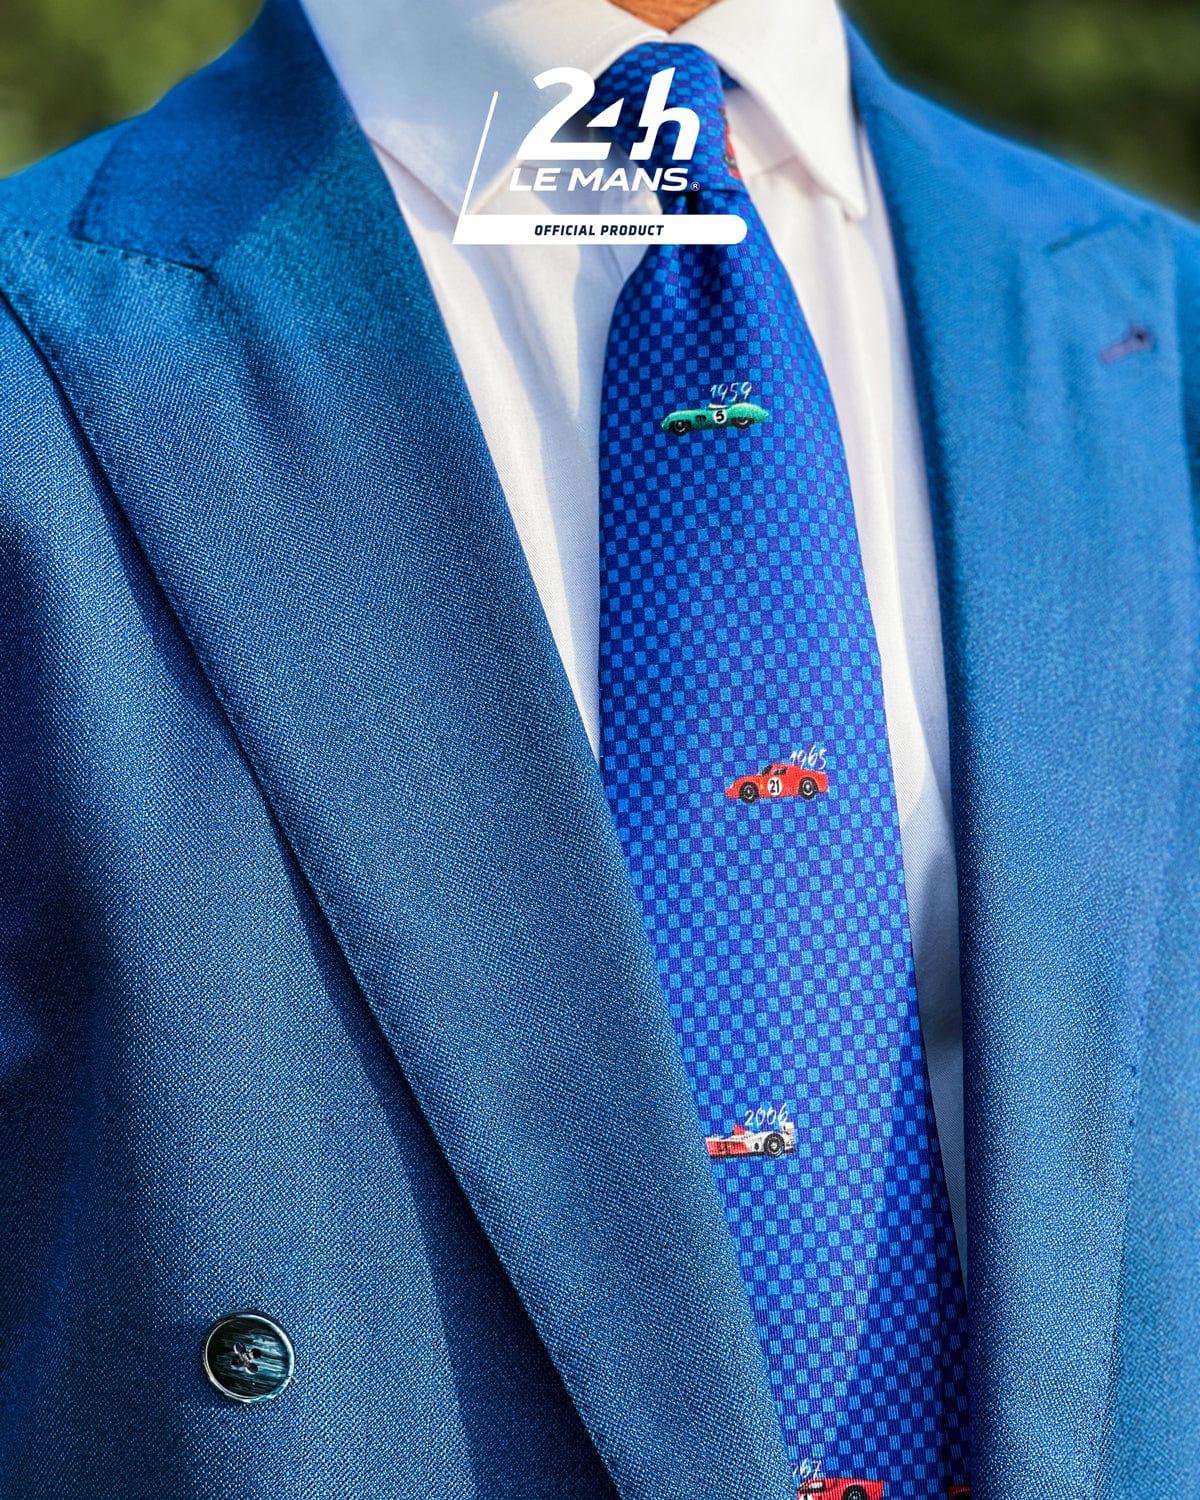 Centenary  24 Hours of Le Mans - Silk Tie - Blue/Red – THE OUTLIERMAN